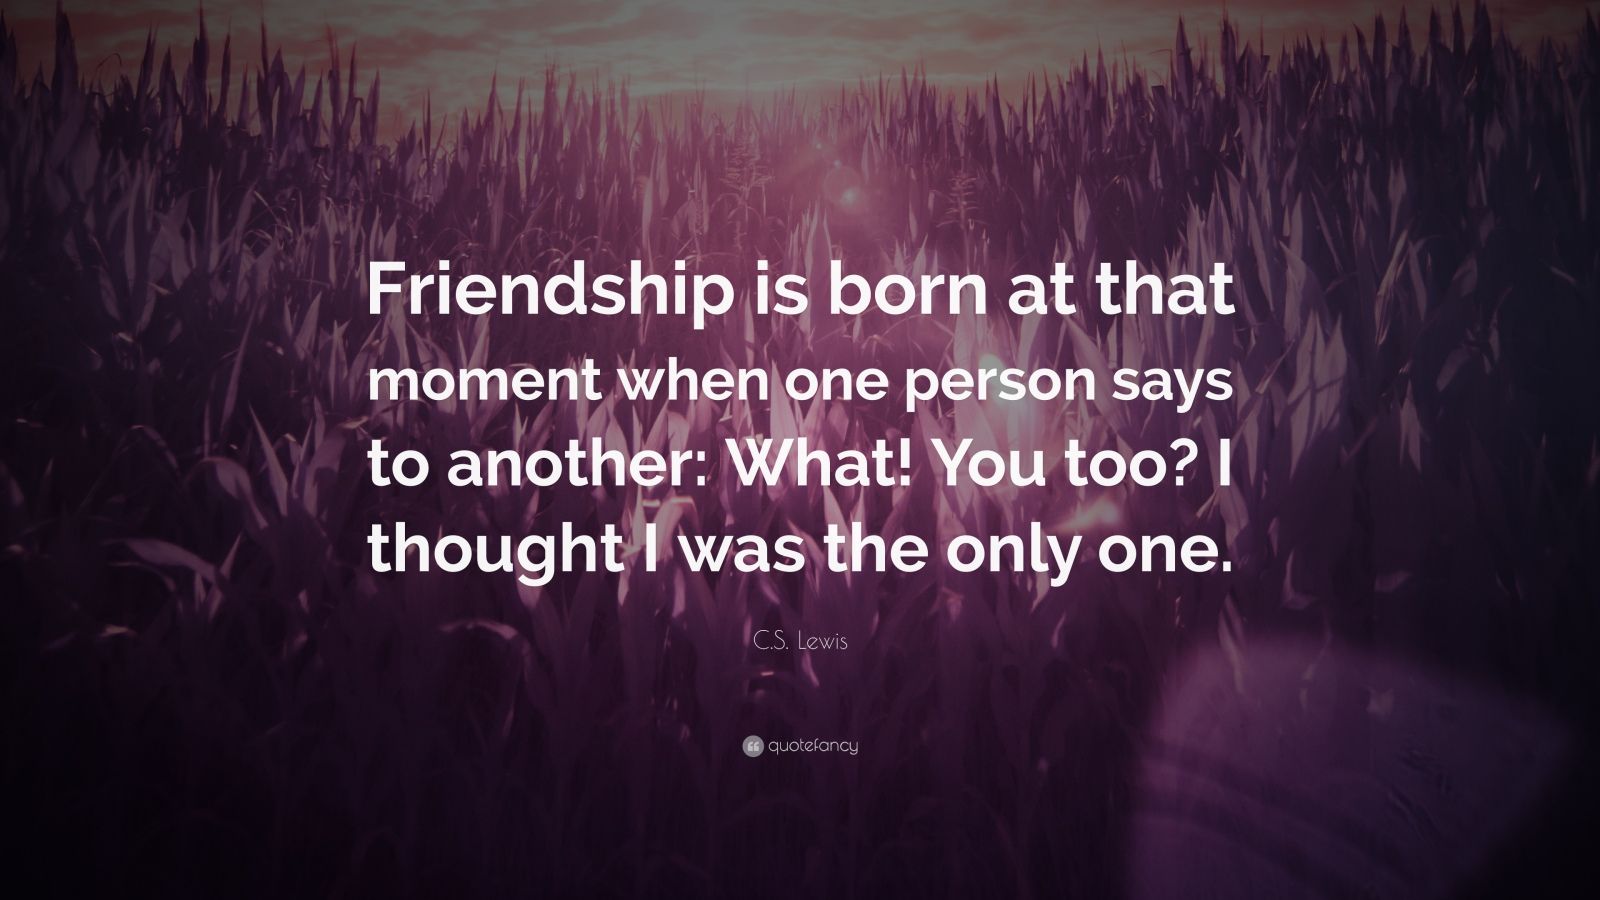 C. S. Lewis Quote: “Friendship is born at that moment when one person